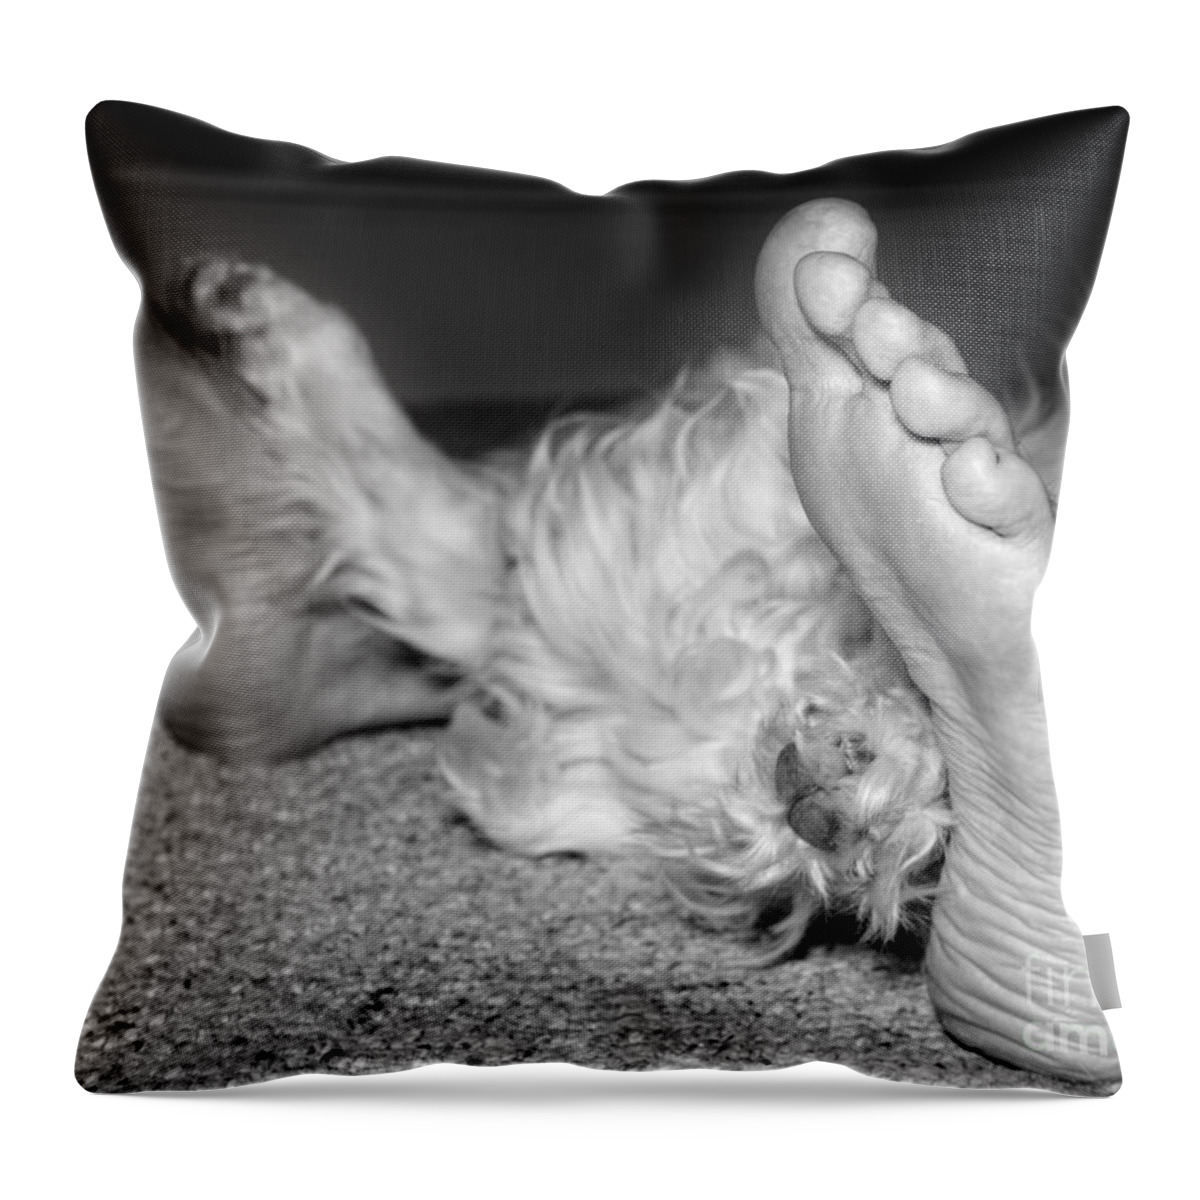 My Favorite Feet Throw Pillow featuring the photograph My Favorite Feet by Jemmy Archer